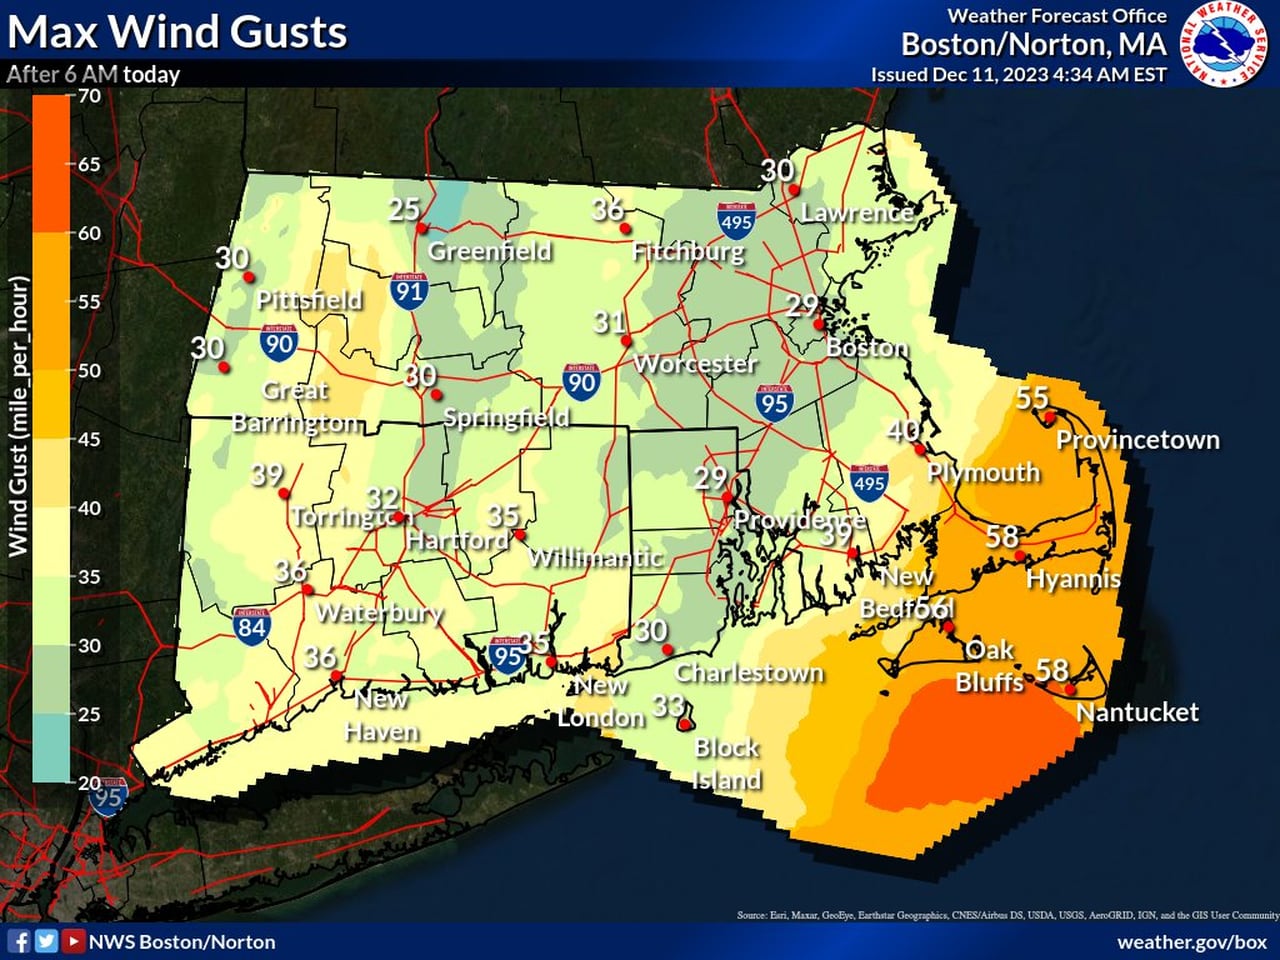 Wind Gusts Monday Morning